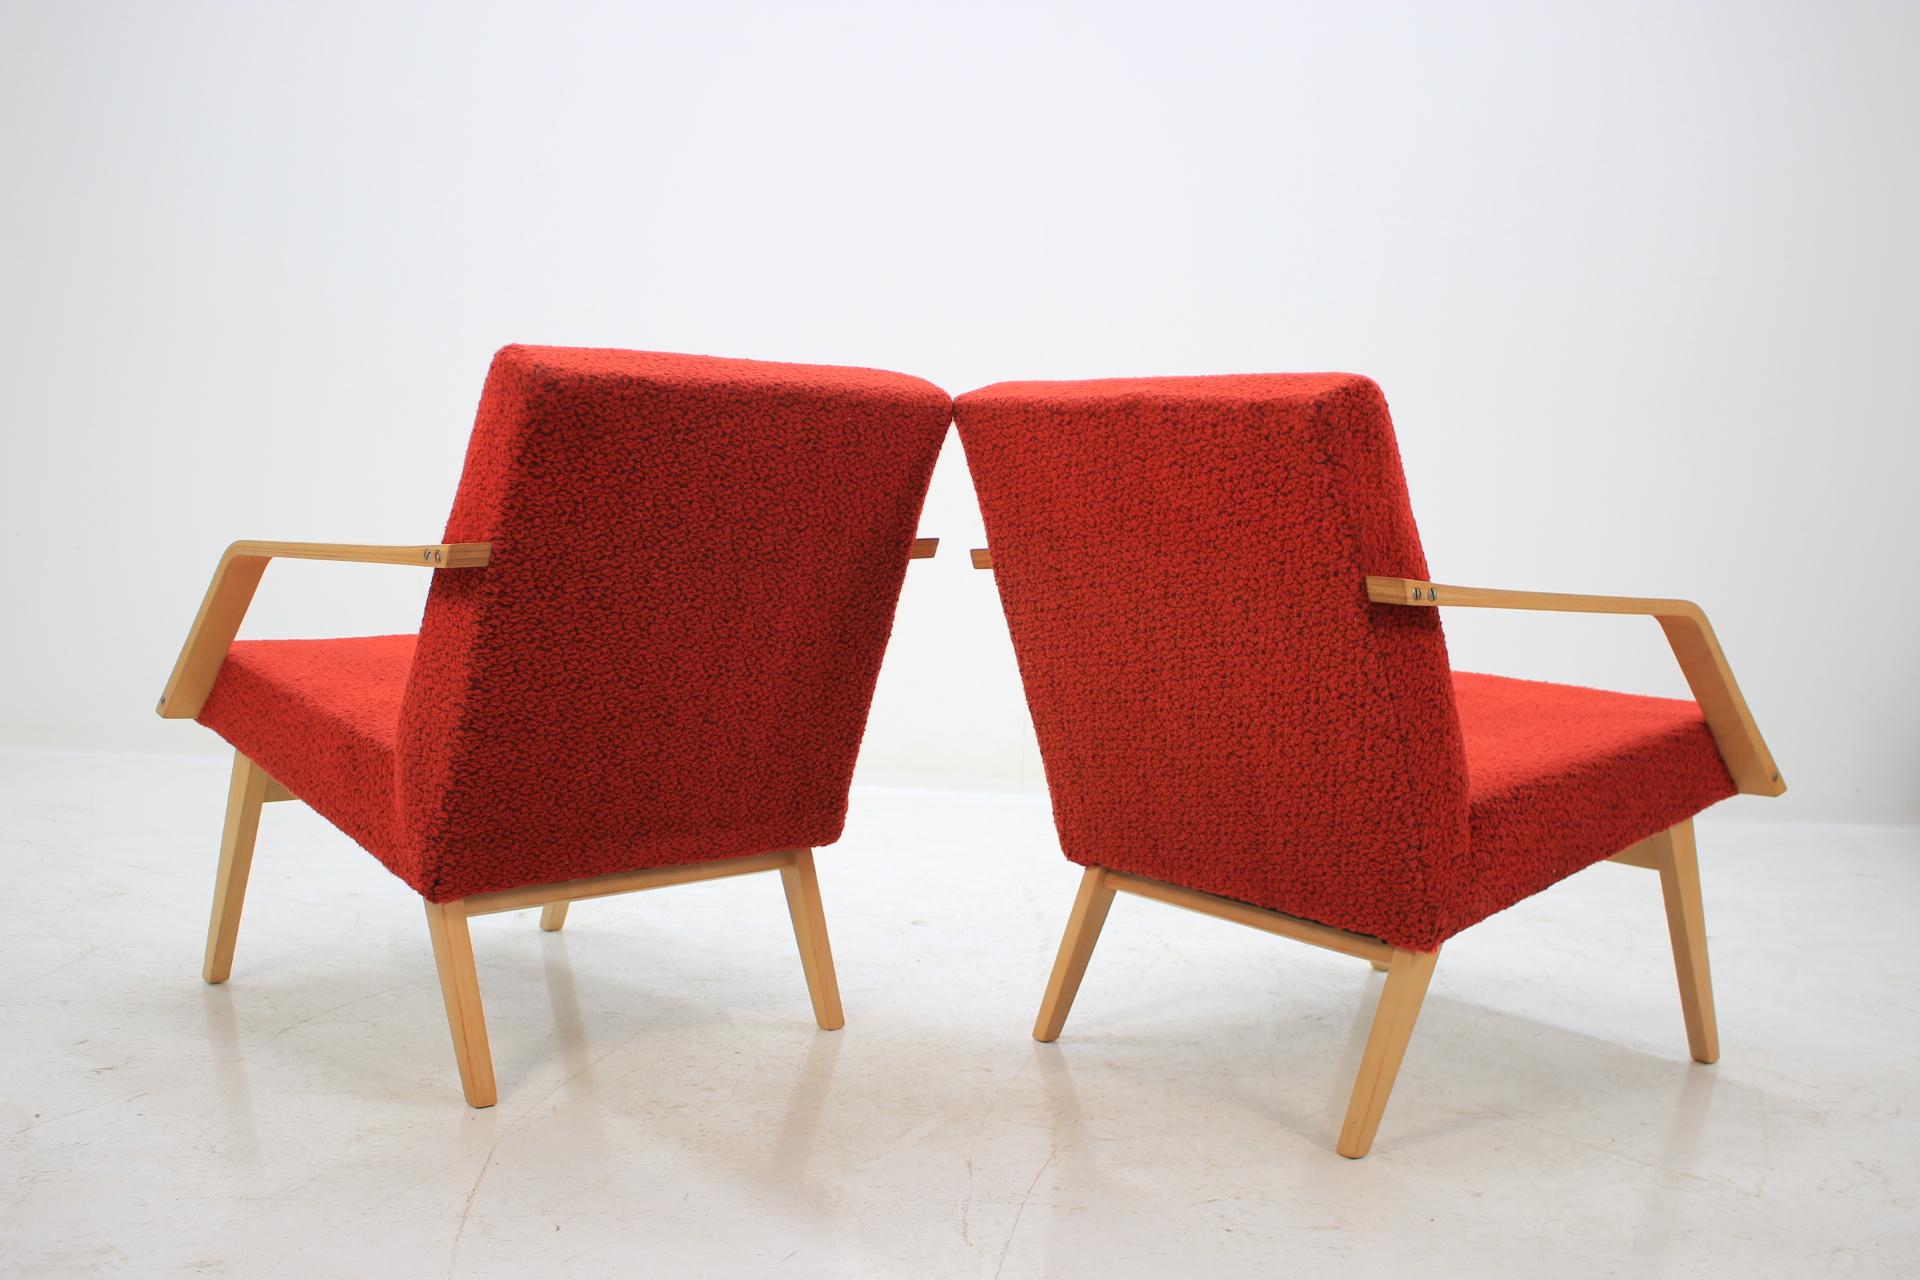 Bentwood Set of Two Lounge Chair by Expo 58 Brusel, 1958's